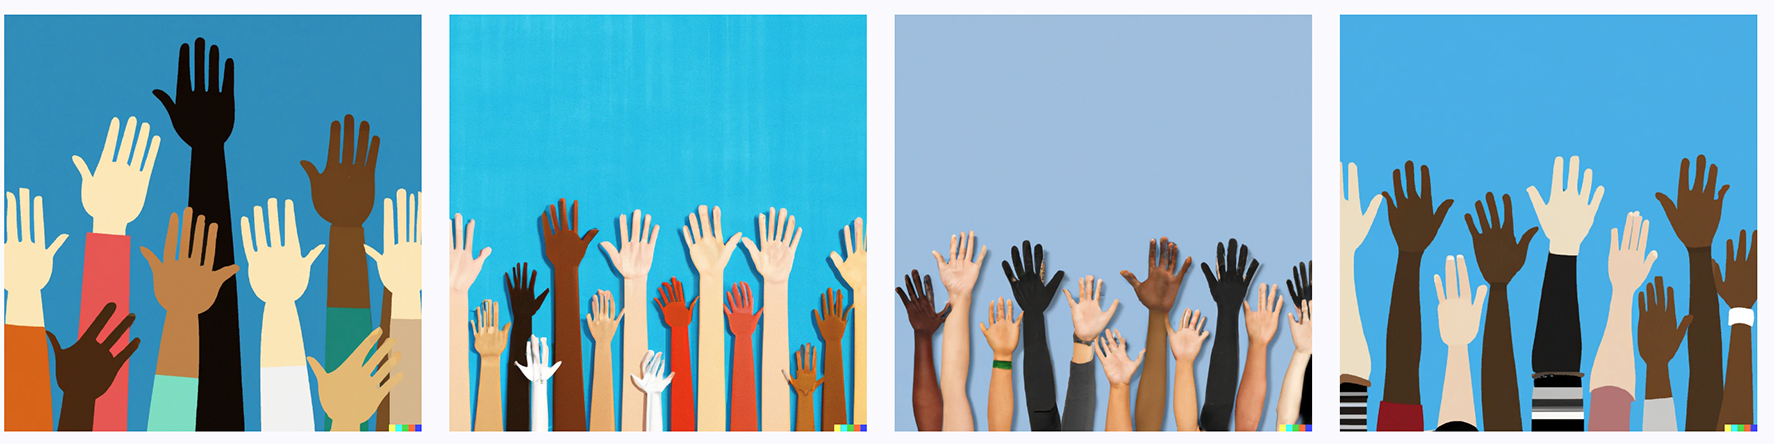 Four different panels with different illustrations of raised hands associated with diverse races